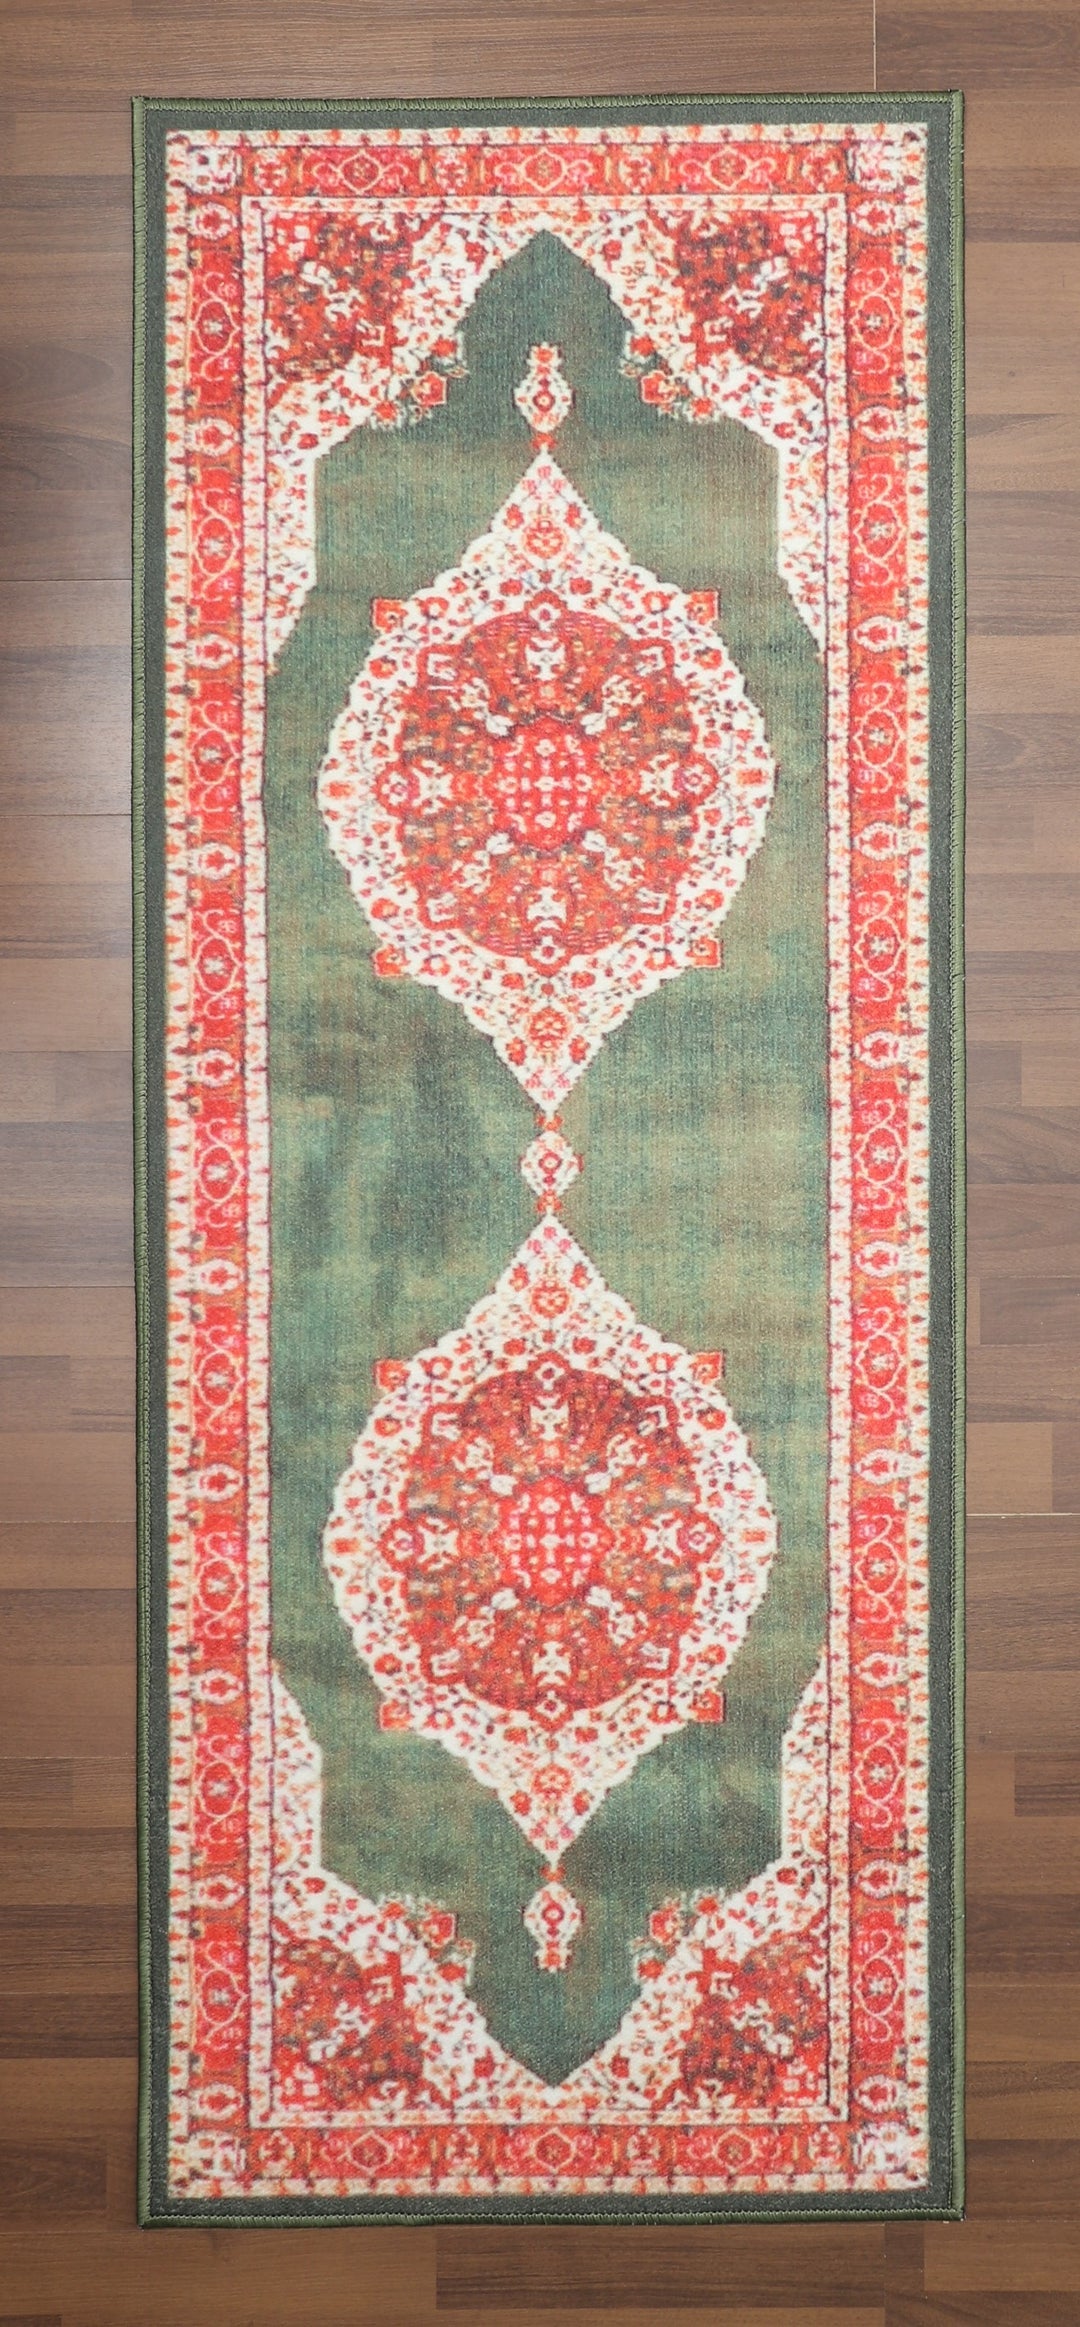 Red And Green Floral Print Runner